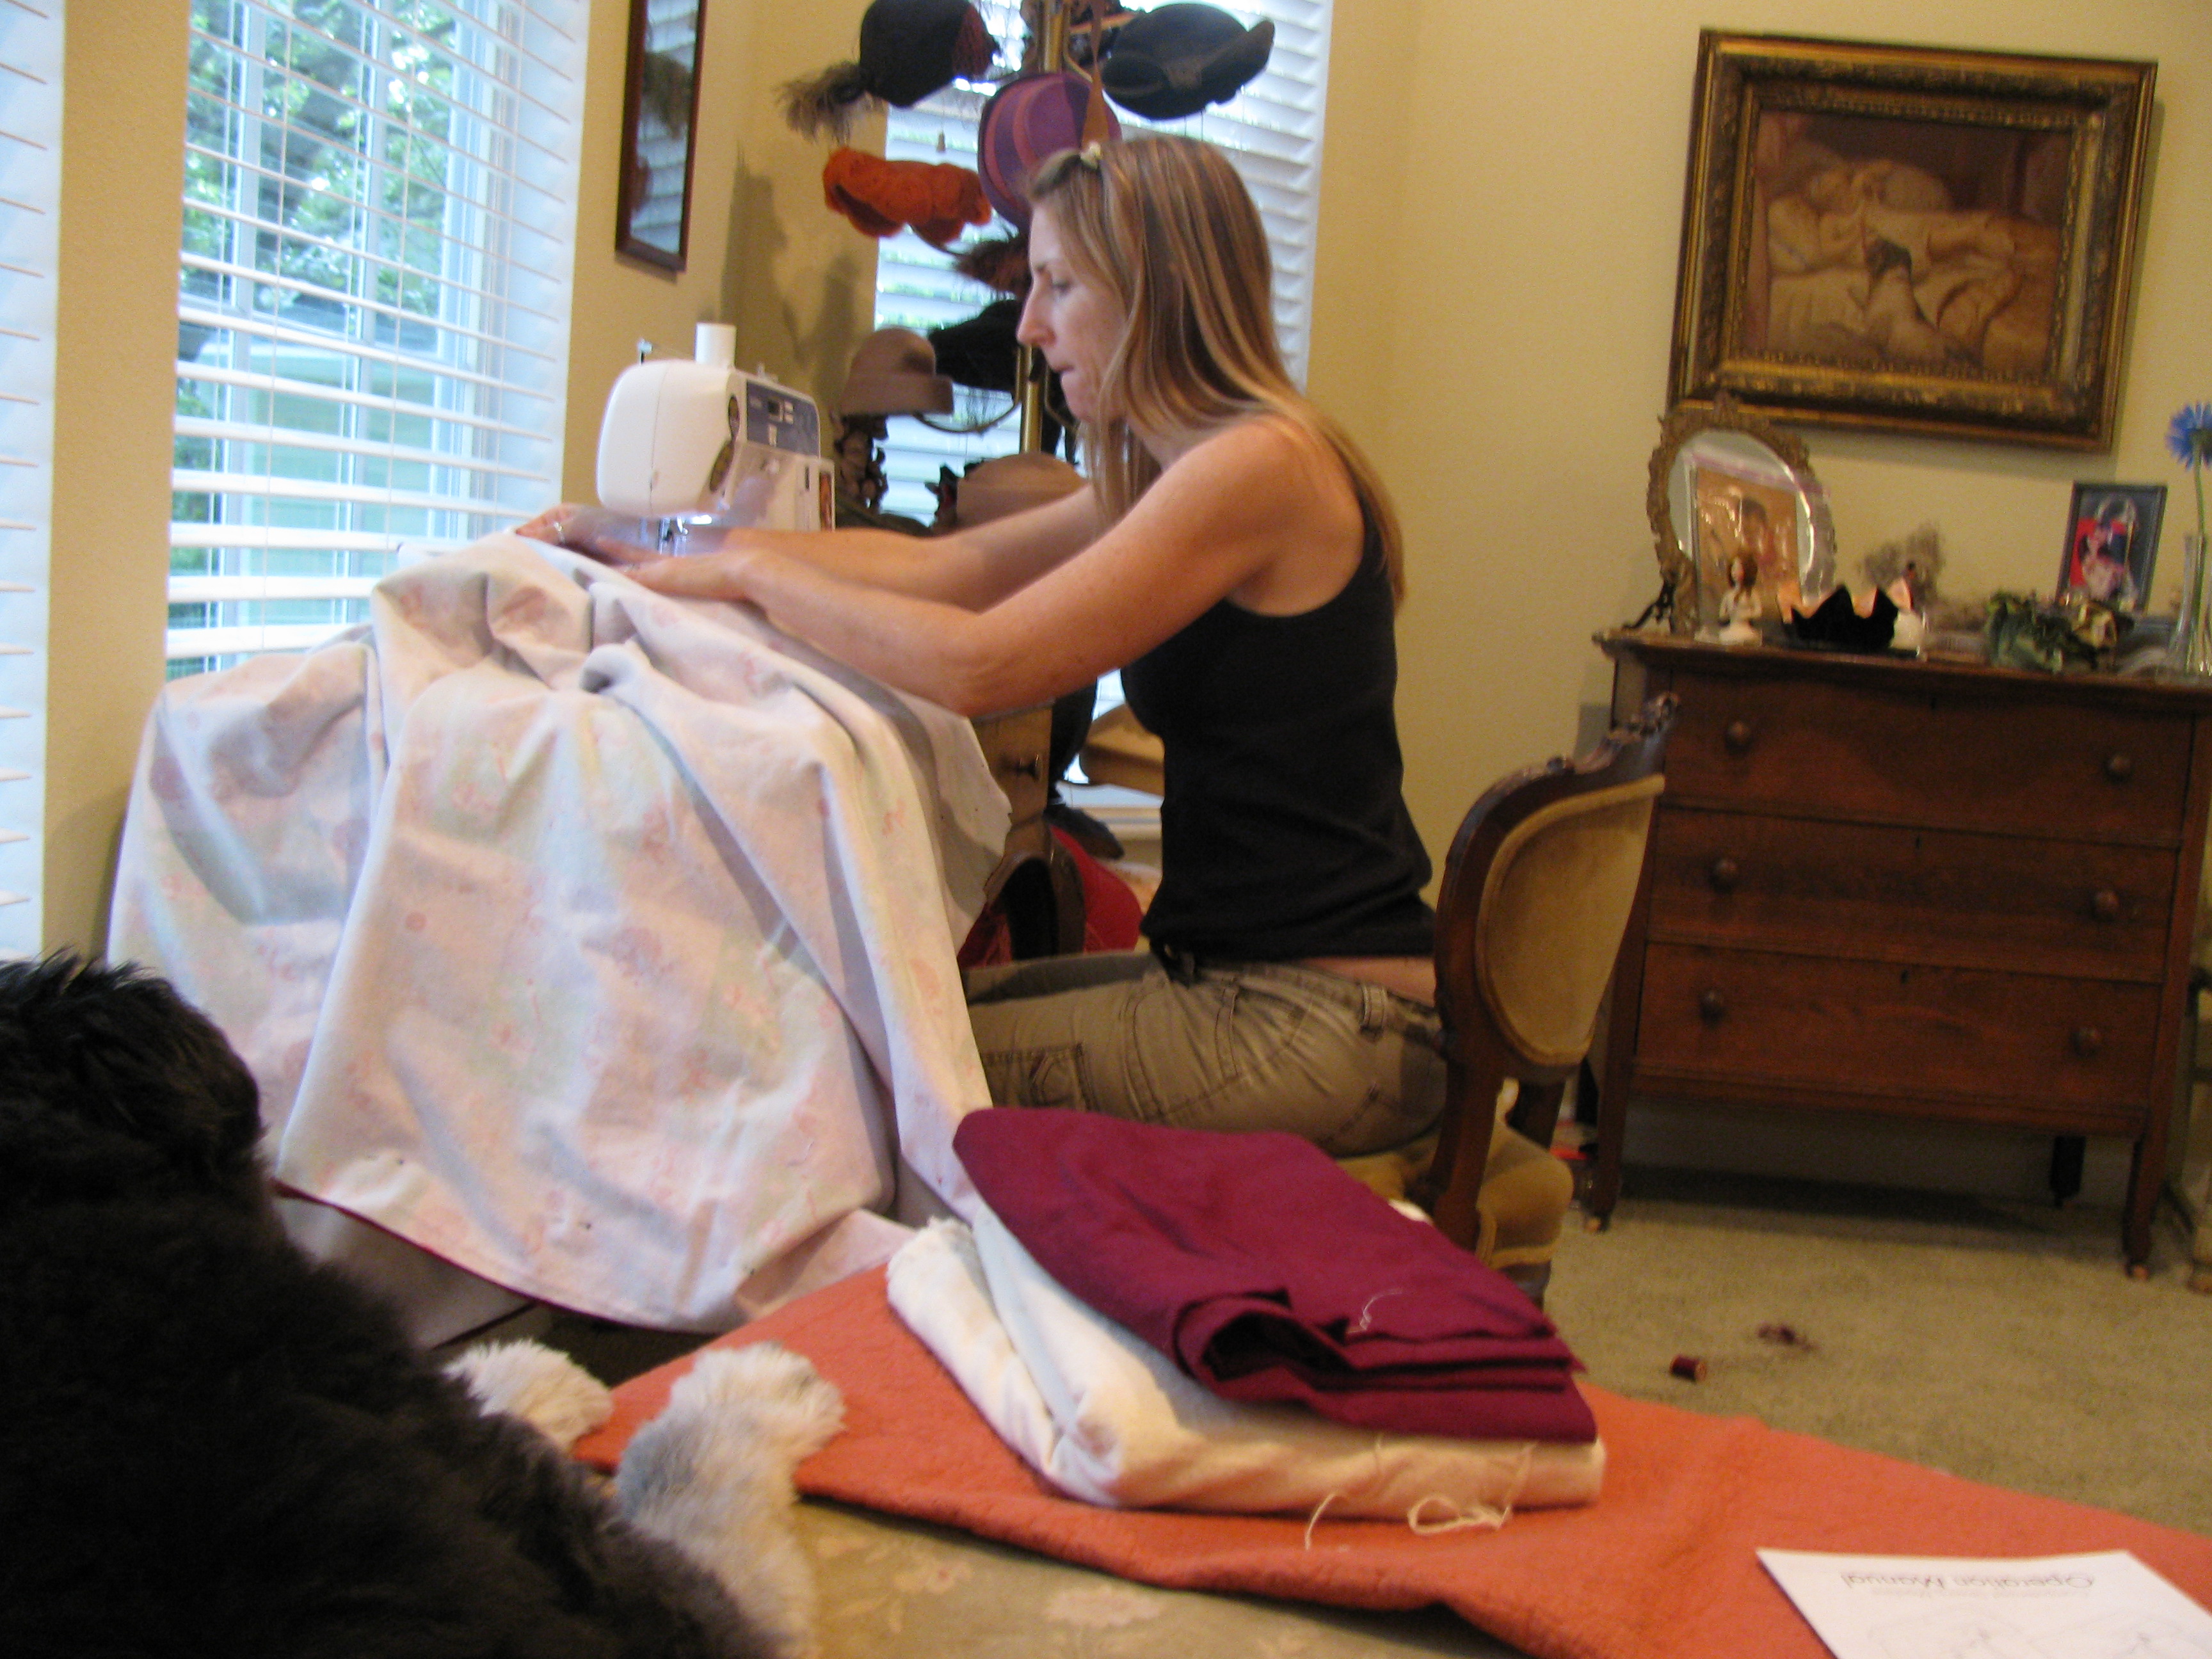 Look at me, I'm sewing! I love this photo. Mostly, because Nate took it but also because I'm surrounded by some of my favorite things, doing something I've wanted to do all my life...sew. Maybe you can teach an old dog some new tricks.